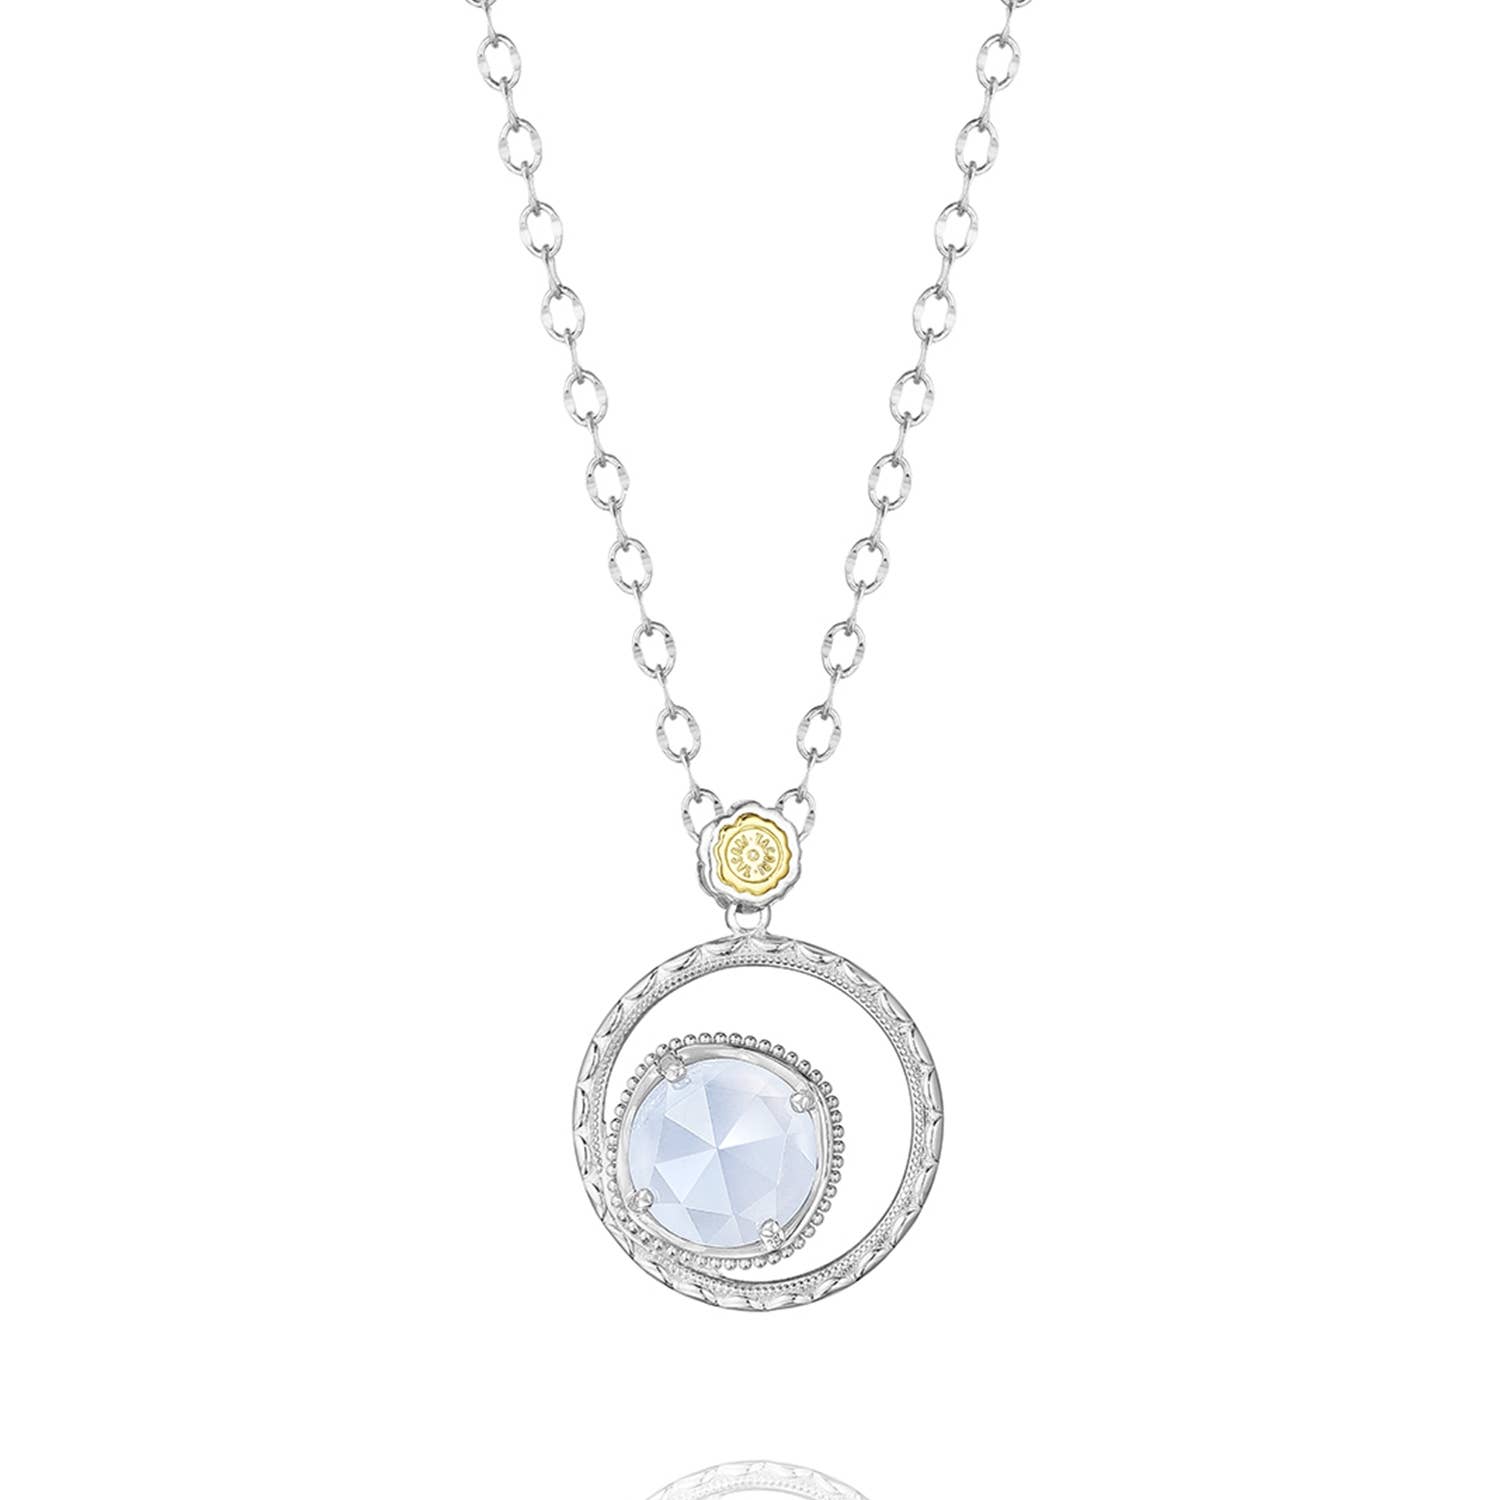 Bold Bloom Necklace featuring Chalcedony